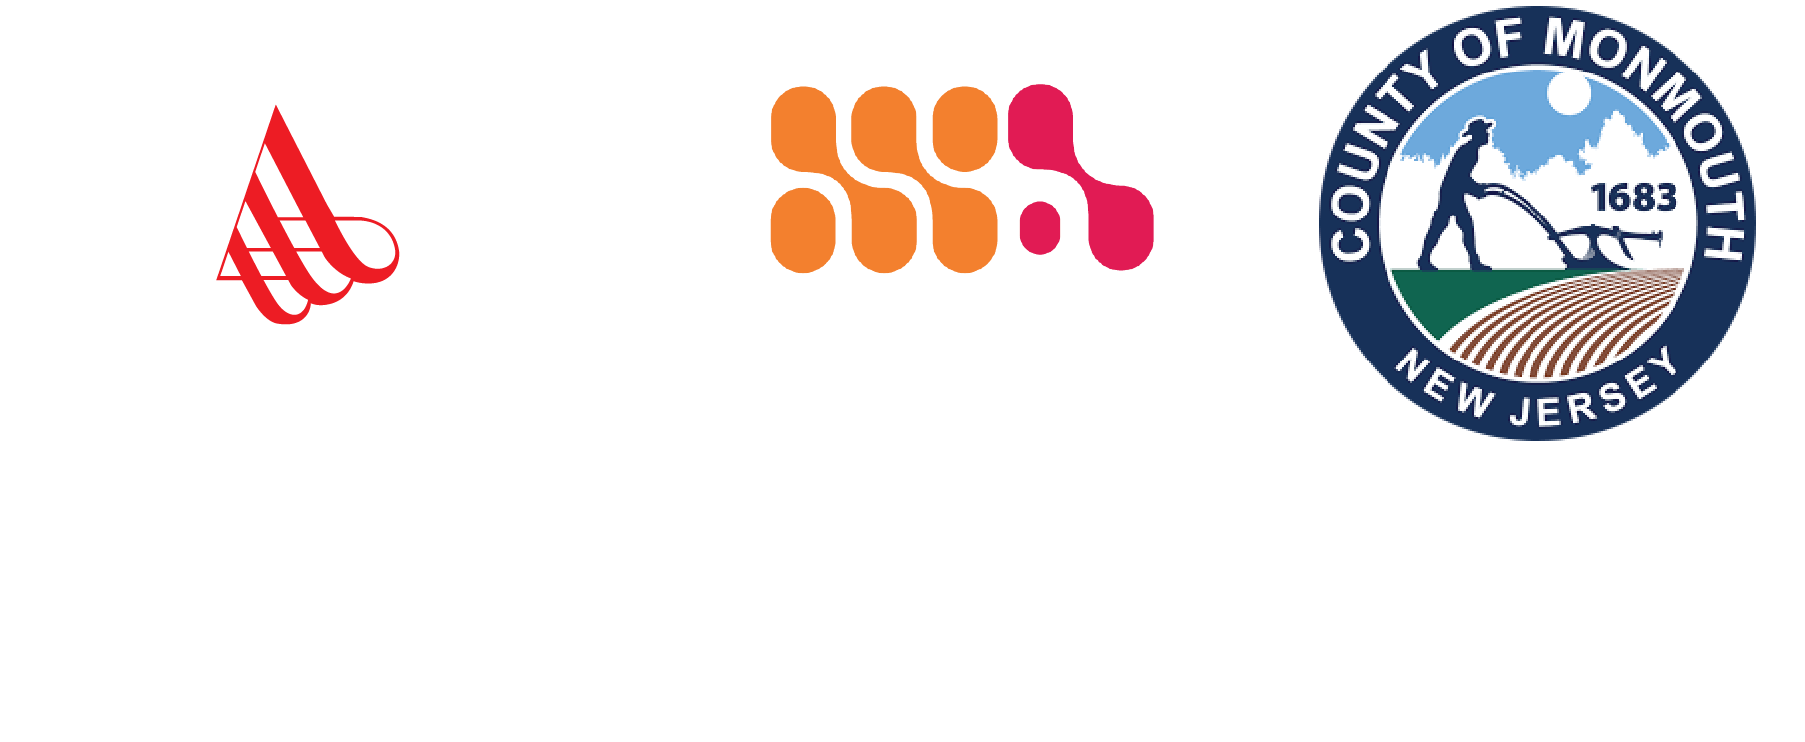 This program is made possible in part by funds from Monmouth Arts, a partner of the New Jersey State Council on the Arts, and the Monmouth County Board of County Commissioners.